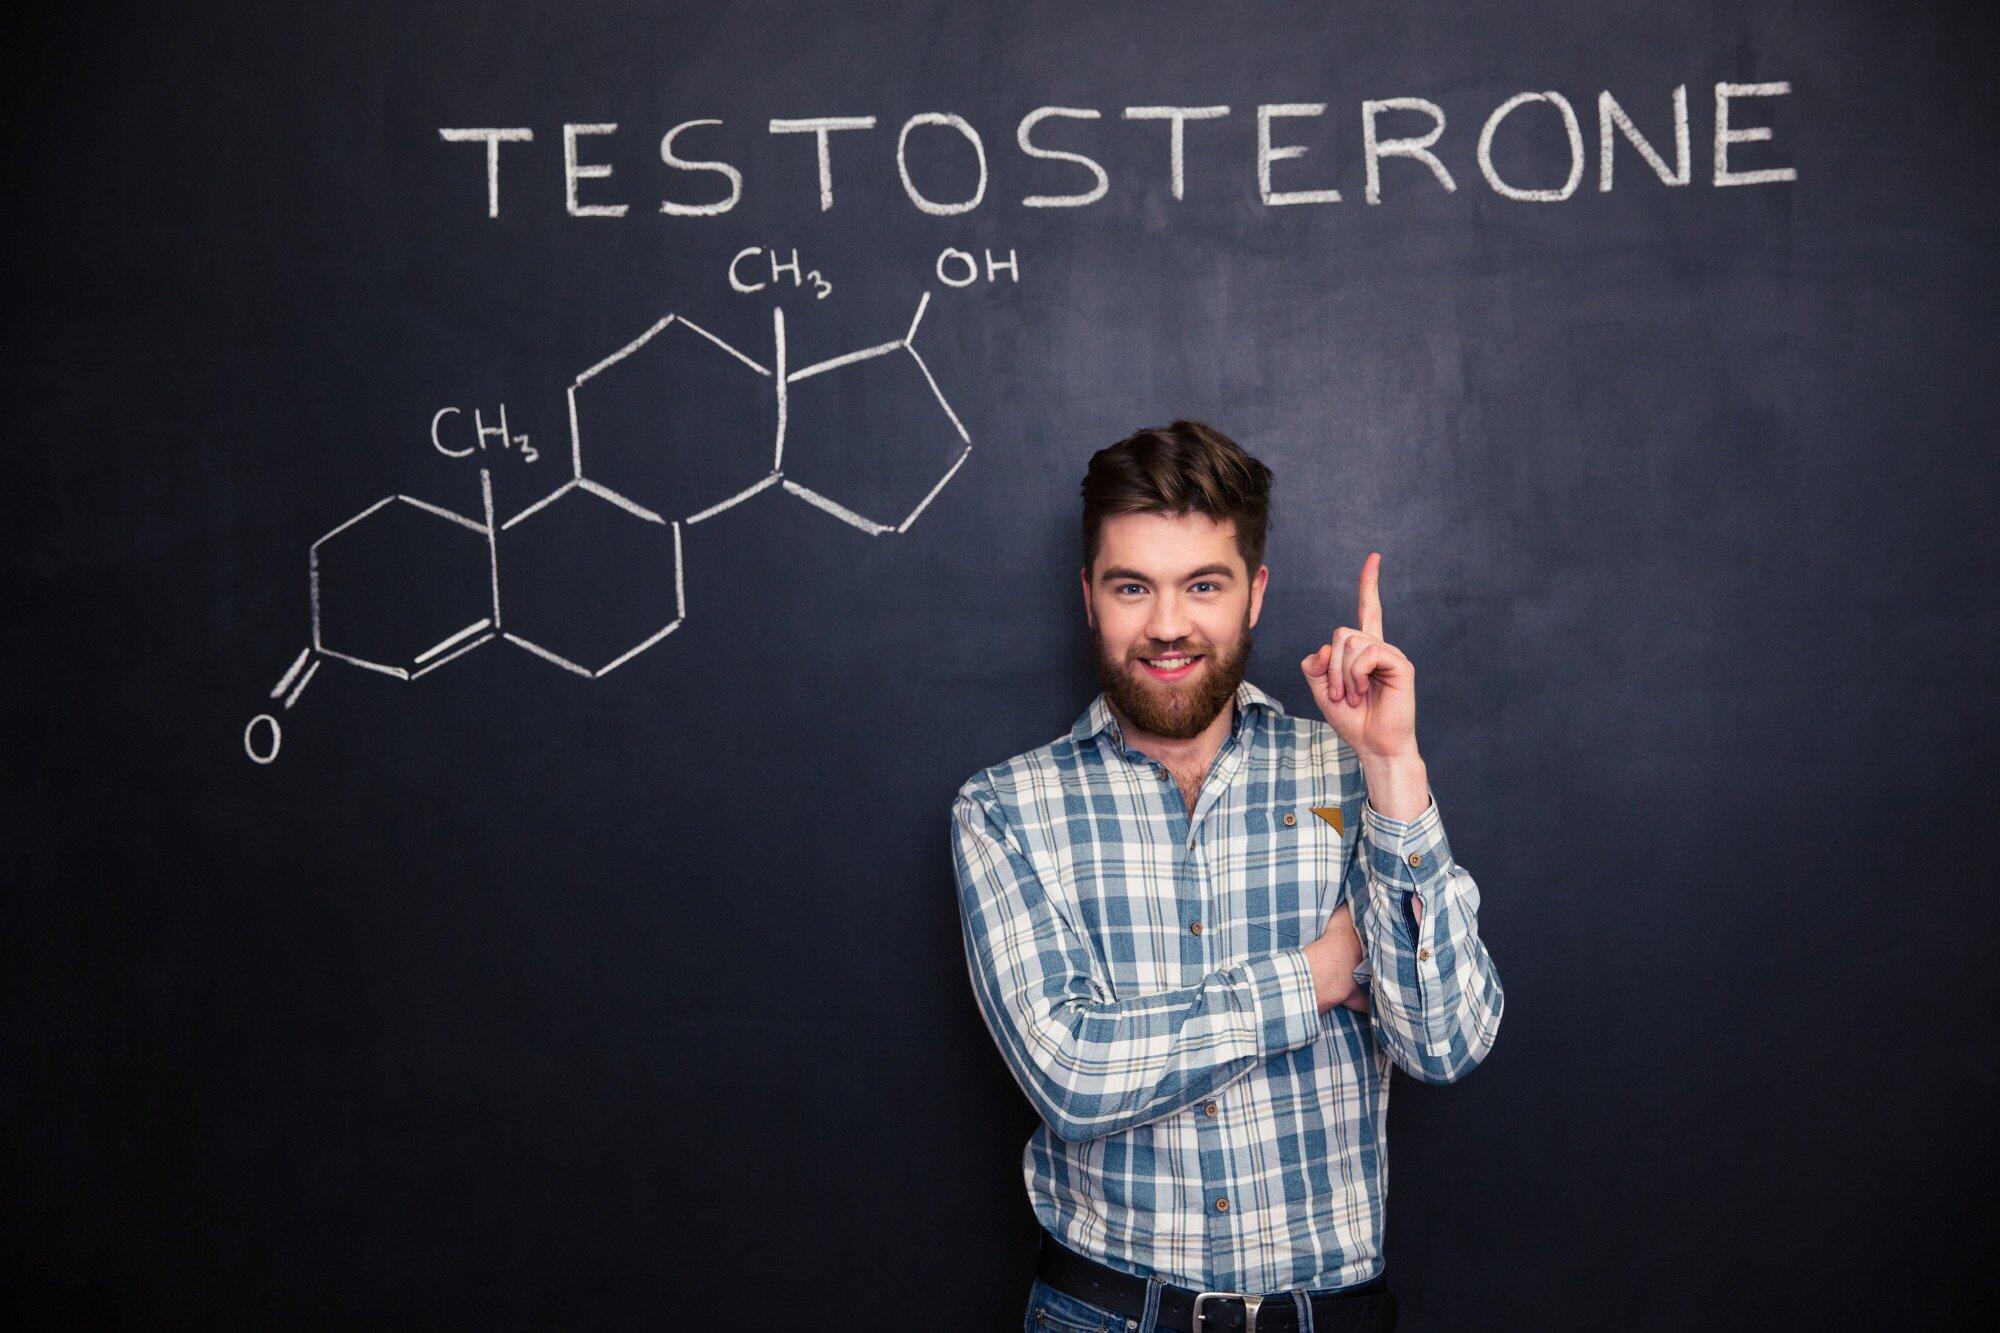 does testosterone make you angry